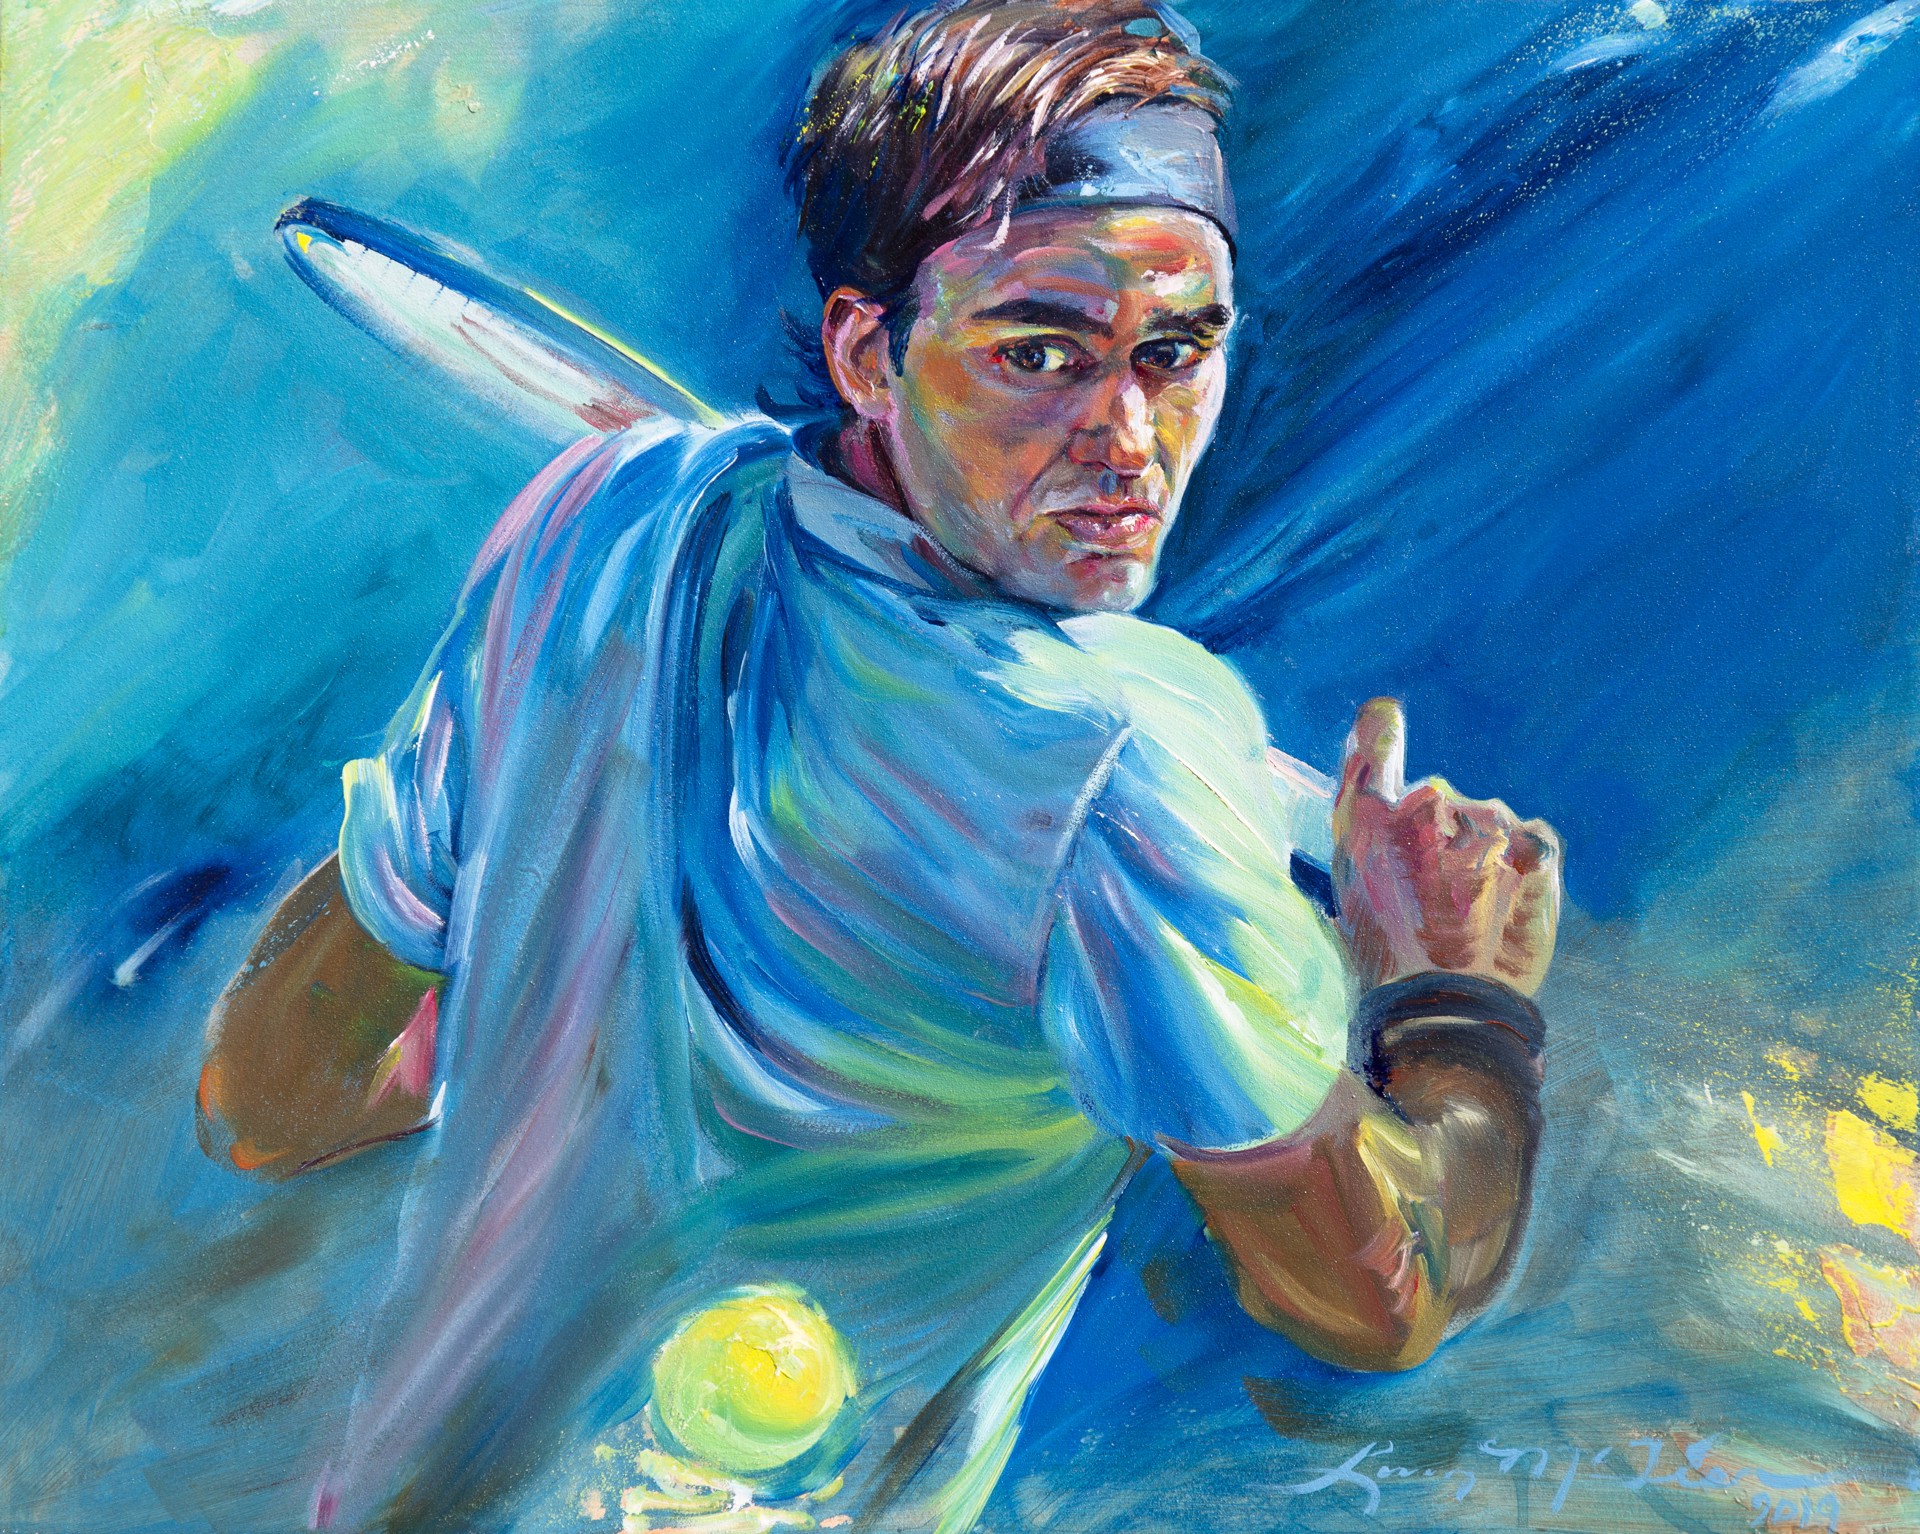 “Rodger Federer” by Lucy McTier